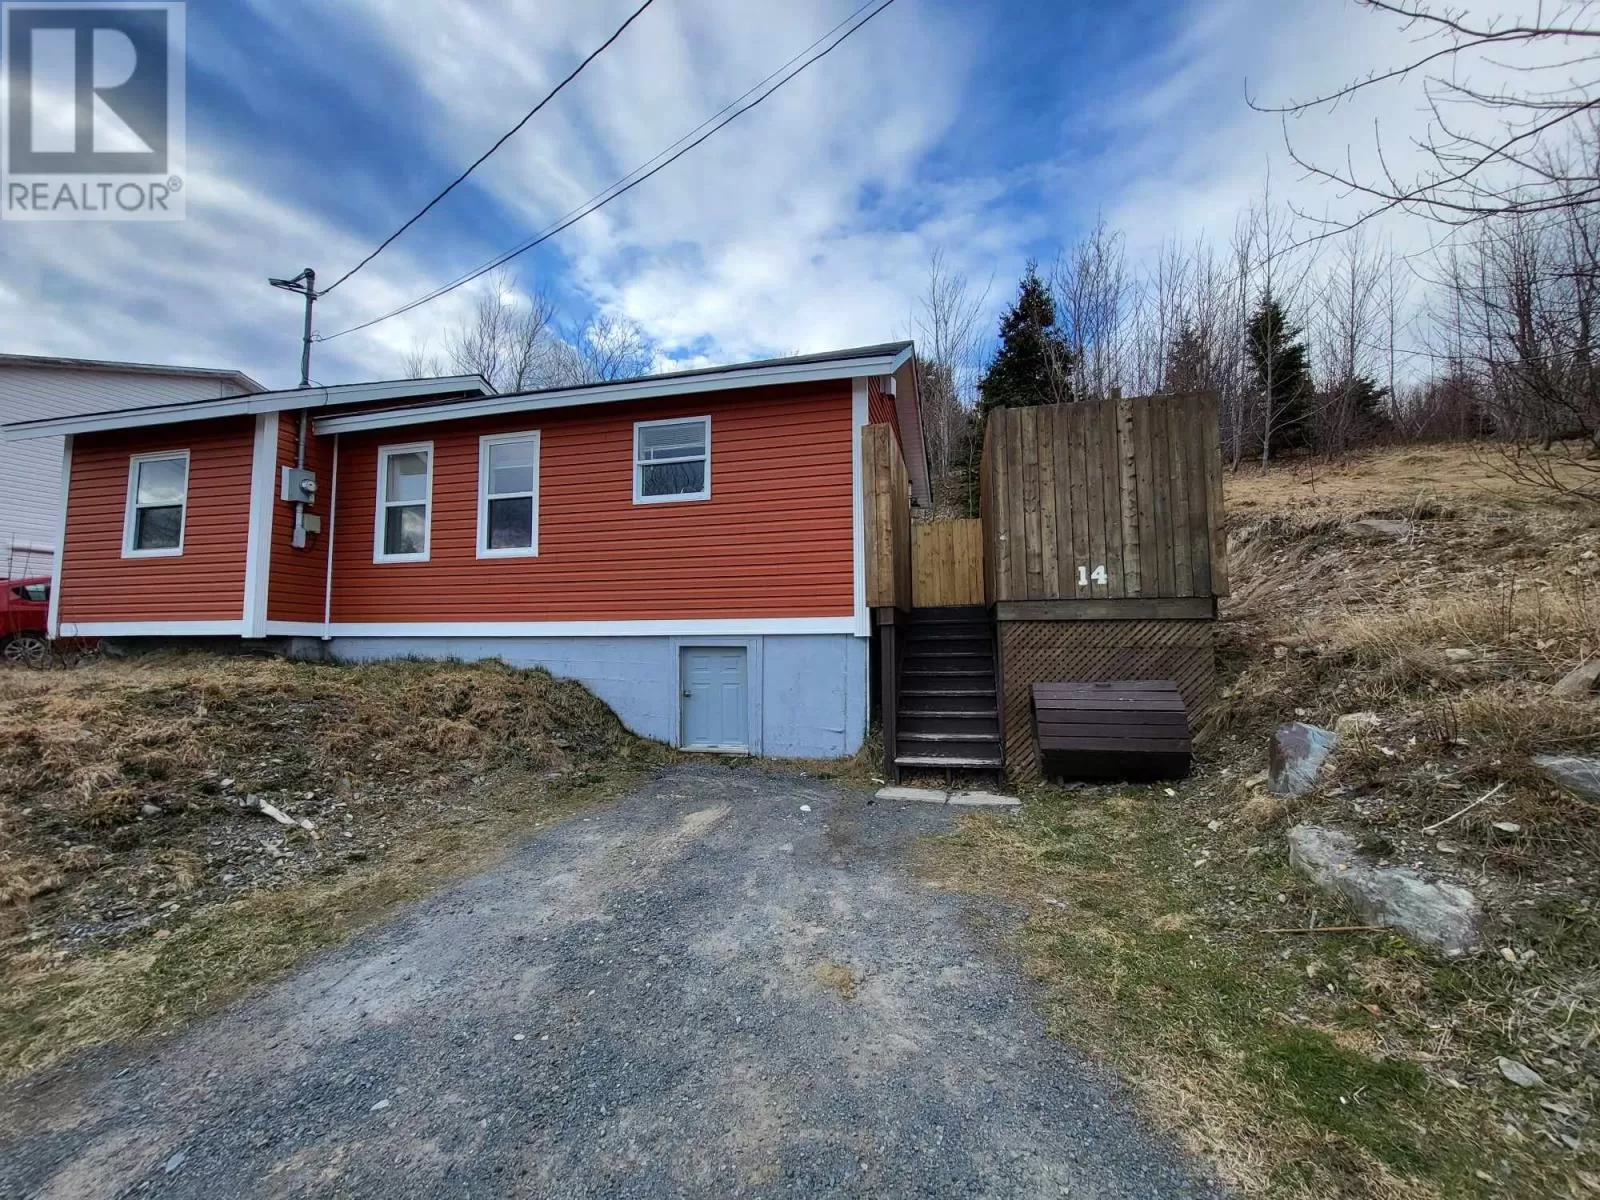 House for rent: 14 Across The Doors Road, Carbonear, Newfoundland & Labrador A1Y 1A9